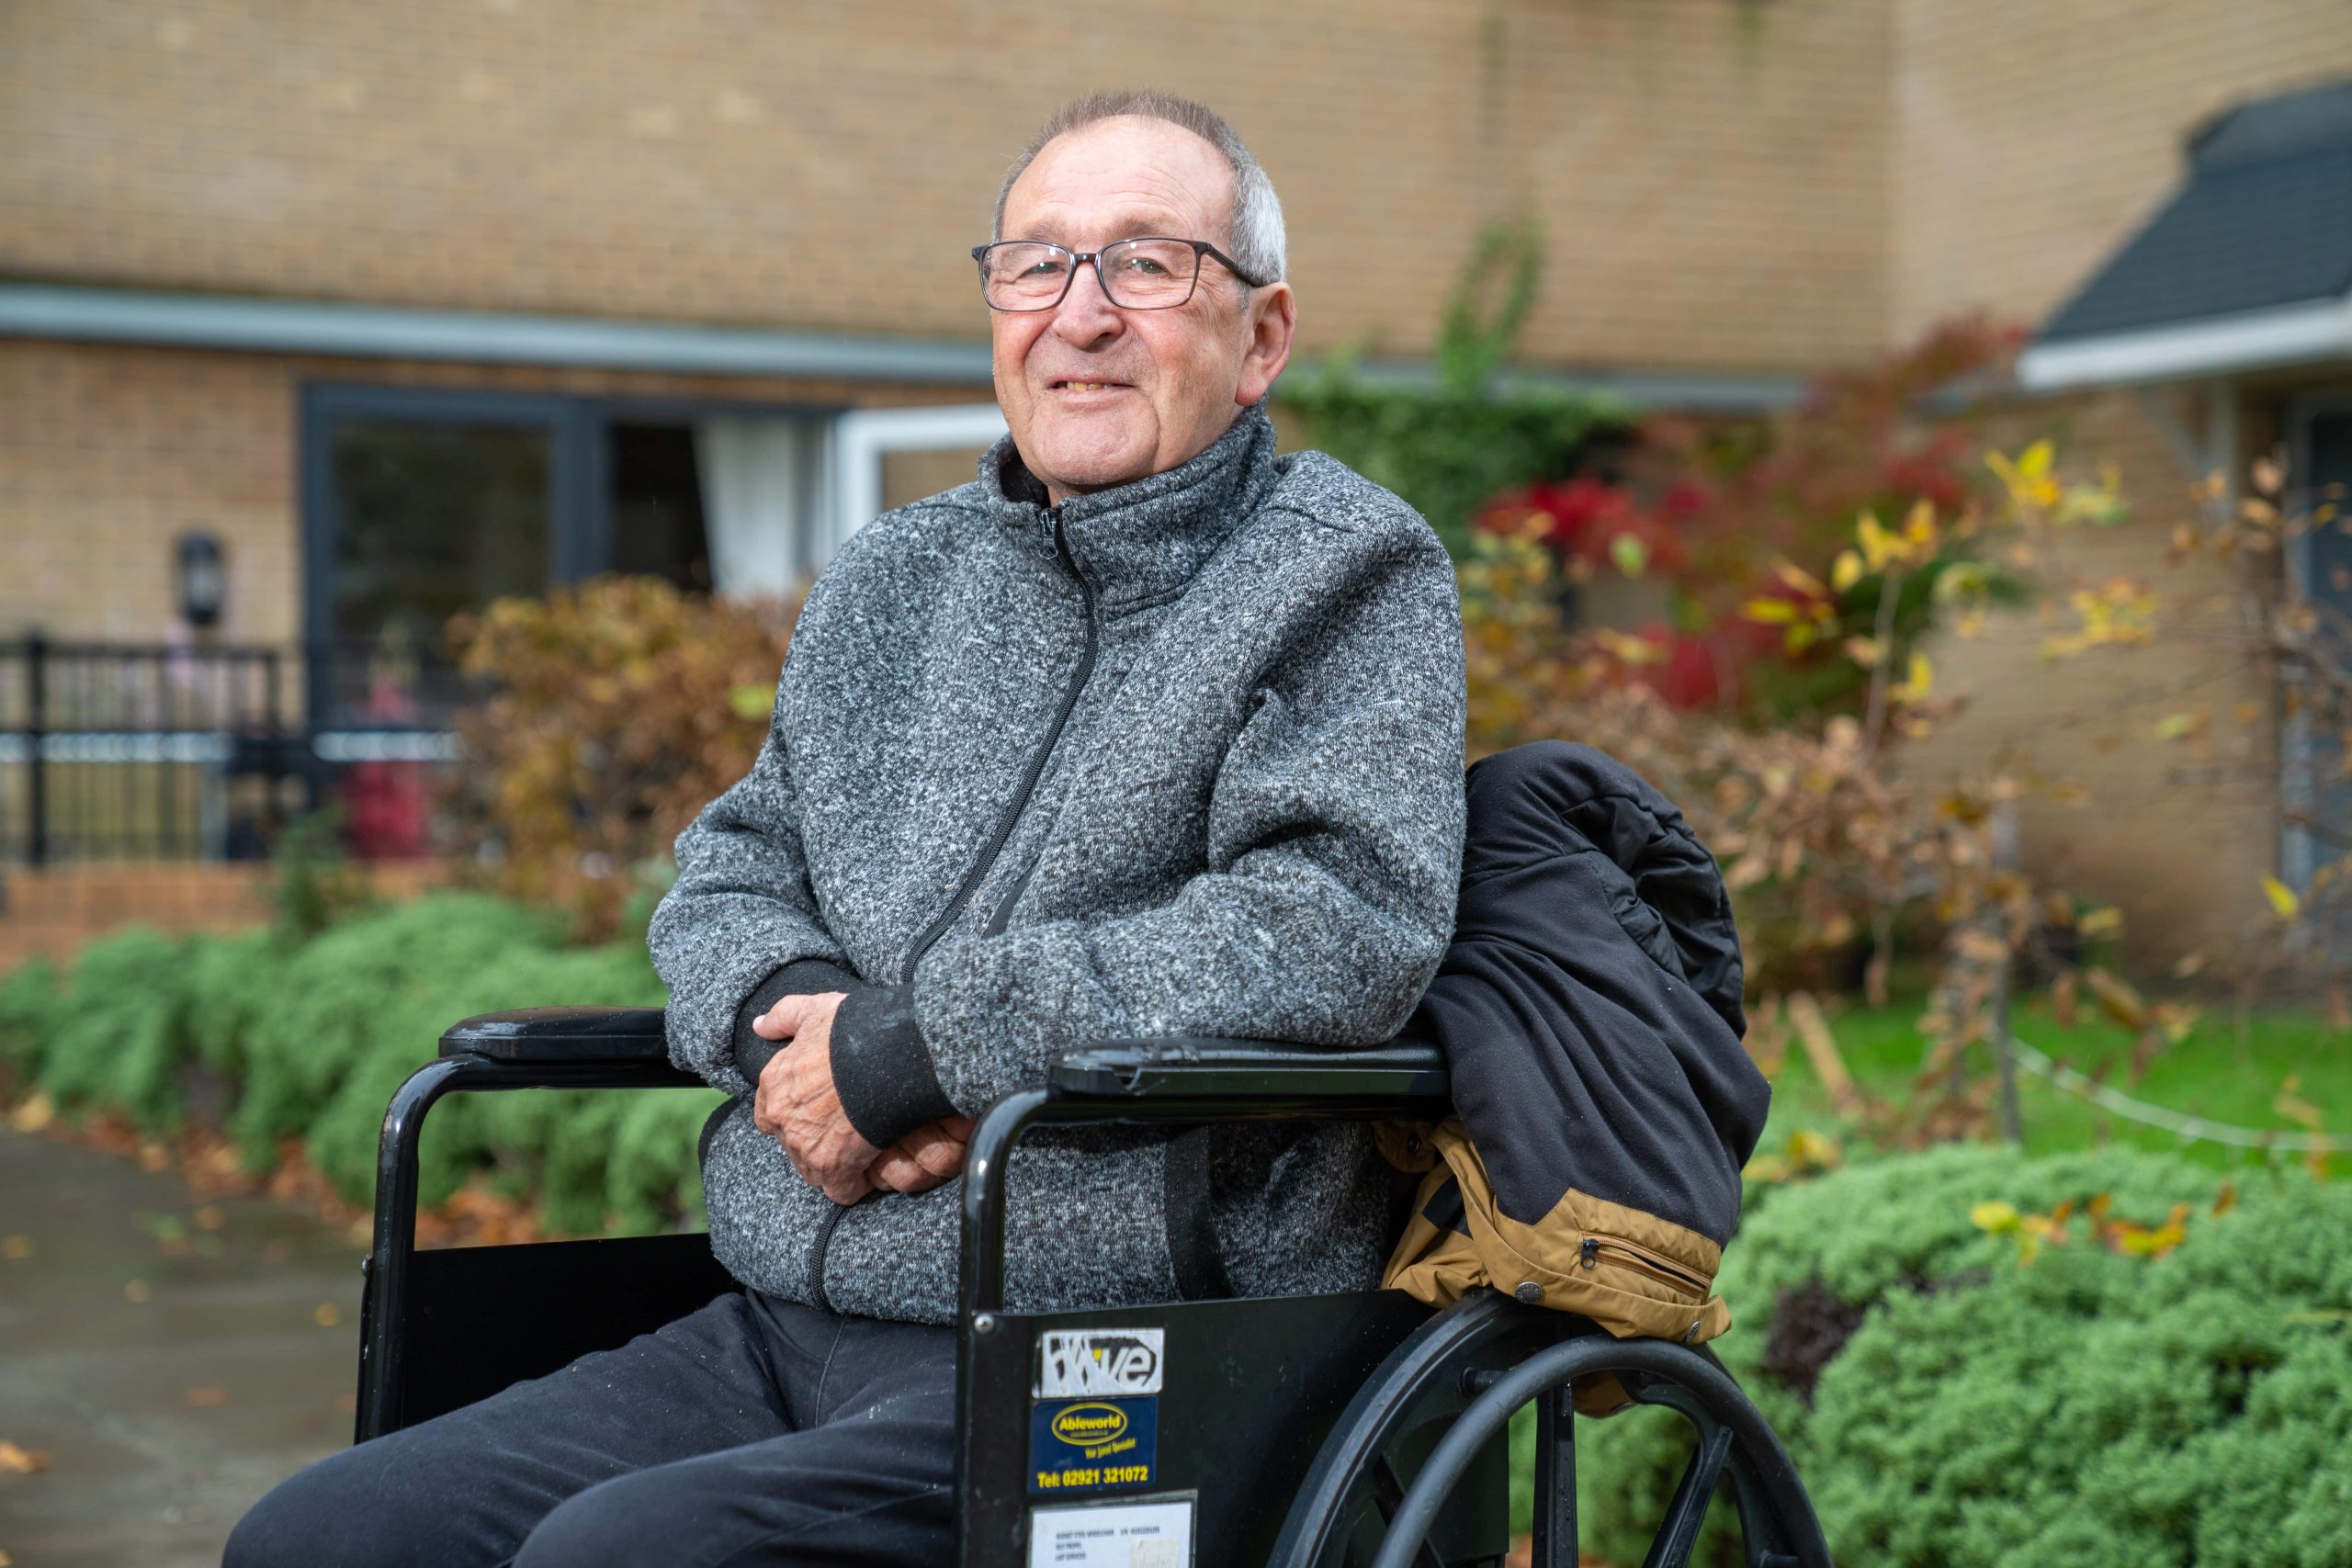 Trivallis Housing Landlord Wales An elderly man in a wheelchair is smiling while posing for the camera, with Trivallis housing and greenery in the background.